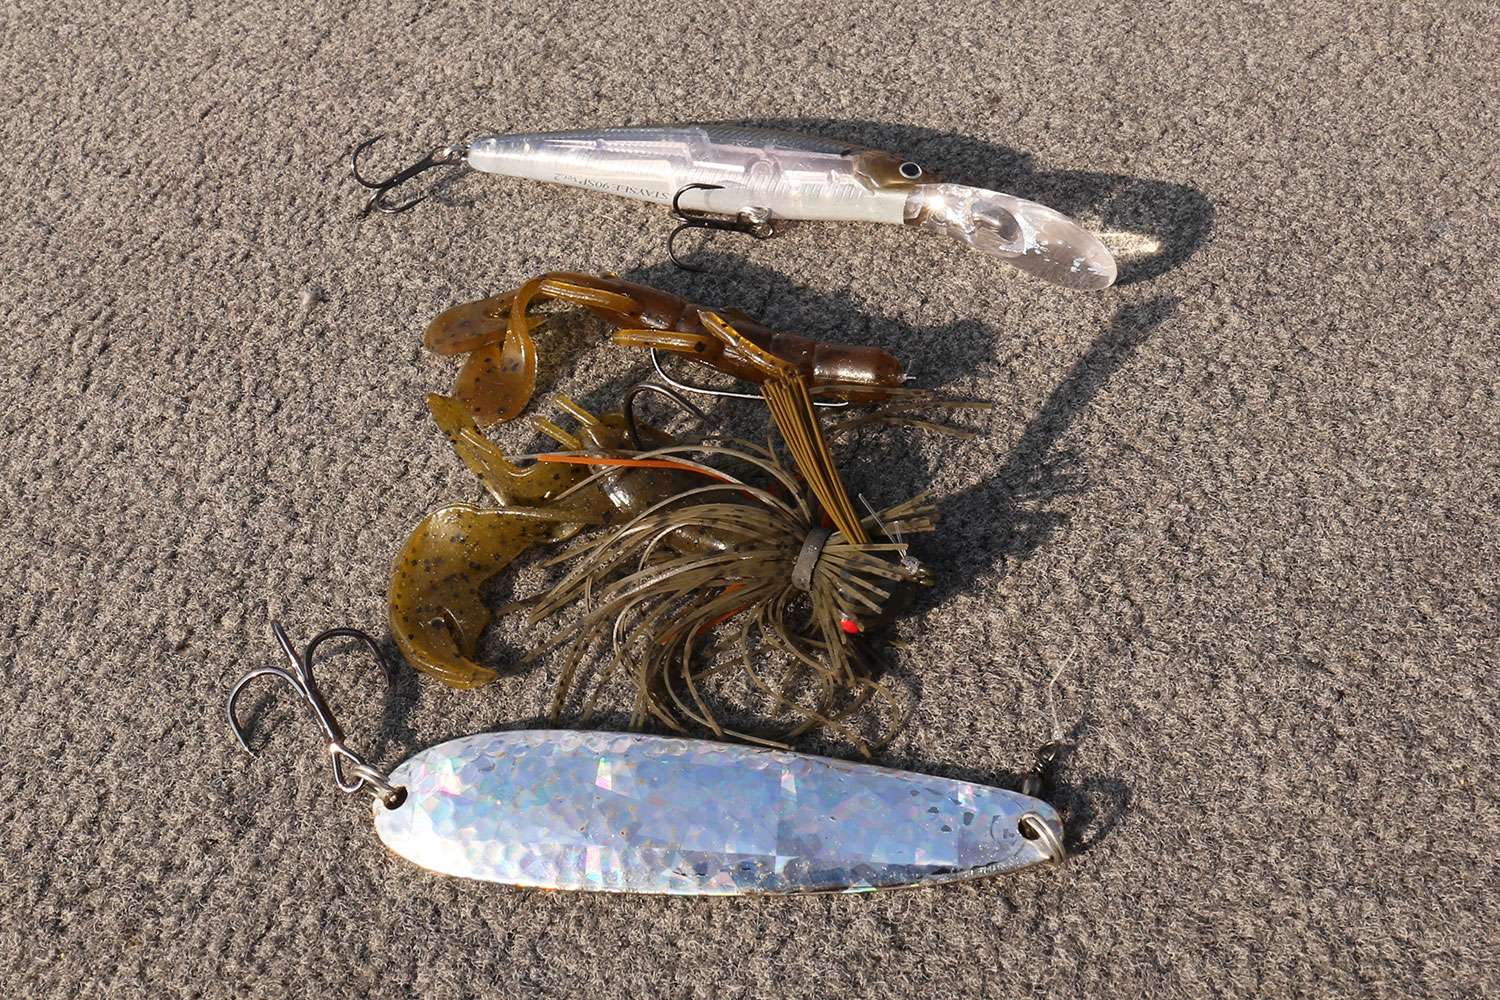 A 3.5-inch Lucky Craft Staysees 90 ver.2 jerkbait was a top choice. Morris also chose a Zoom Ultra Vibe Speed Craw for Carolina and Texas rigs. He also relied on his mainstay 3/4-ounce War Eagle Football Jig with a Strike King Rage Craw. For suspended fish he used a 4.75-inch Flutter Spoon. 